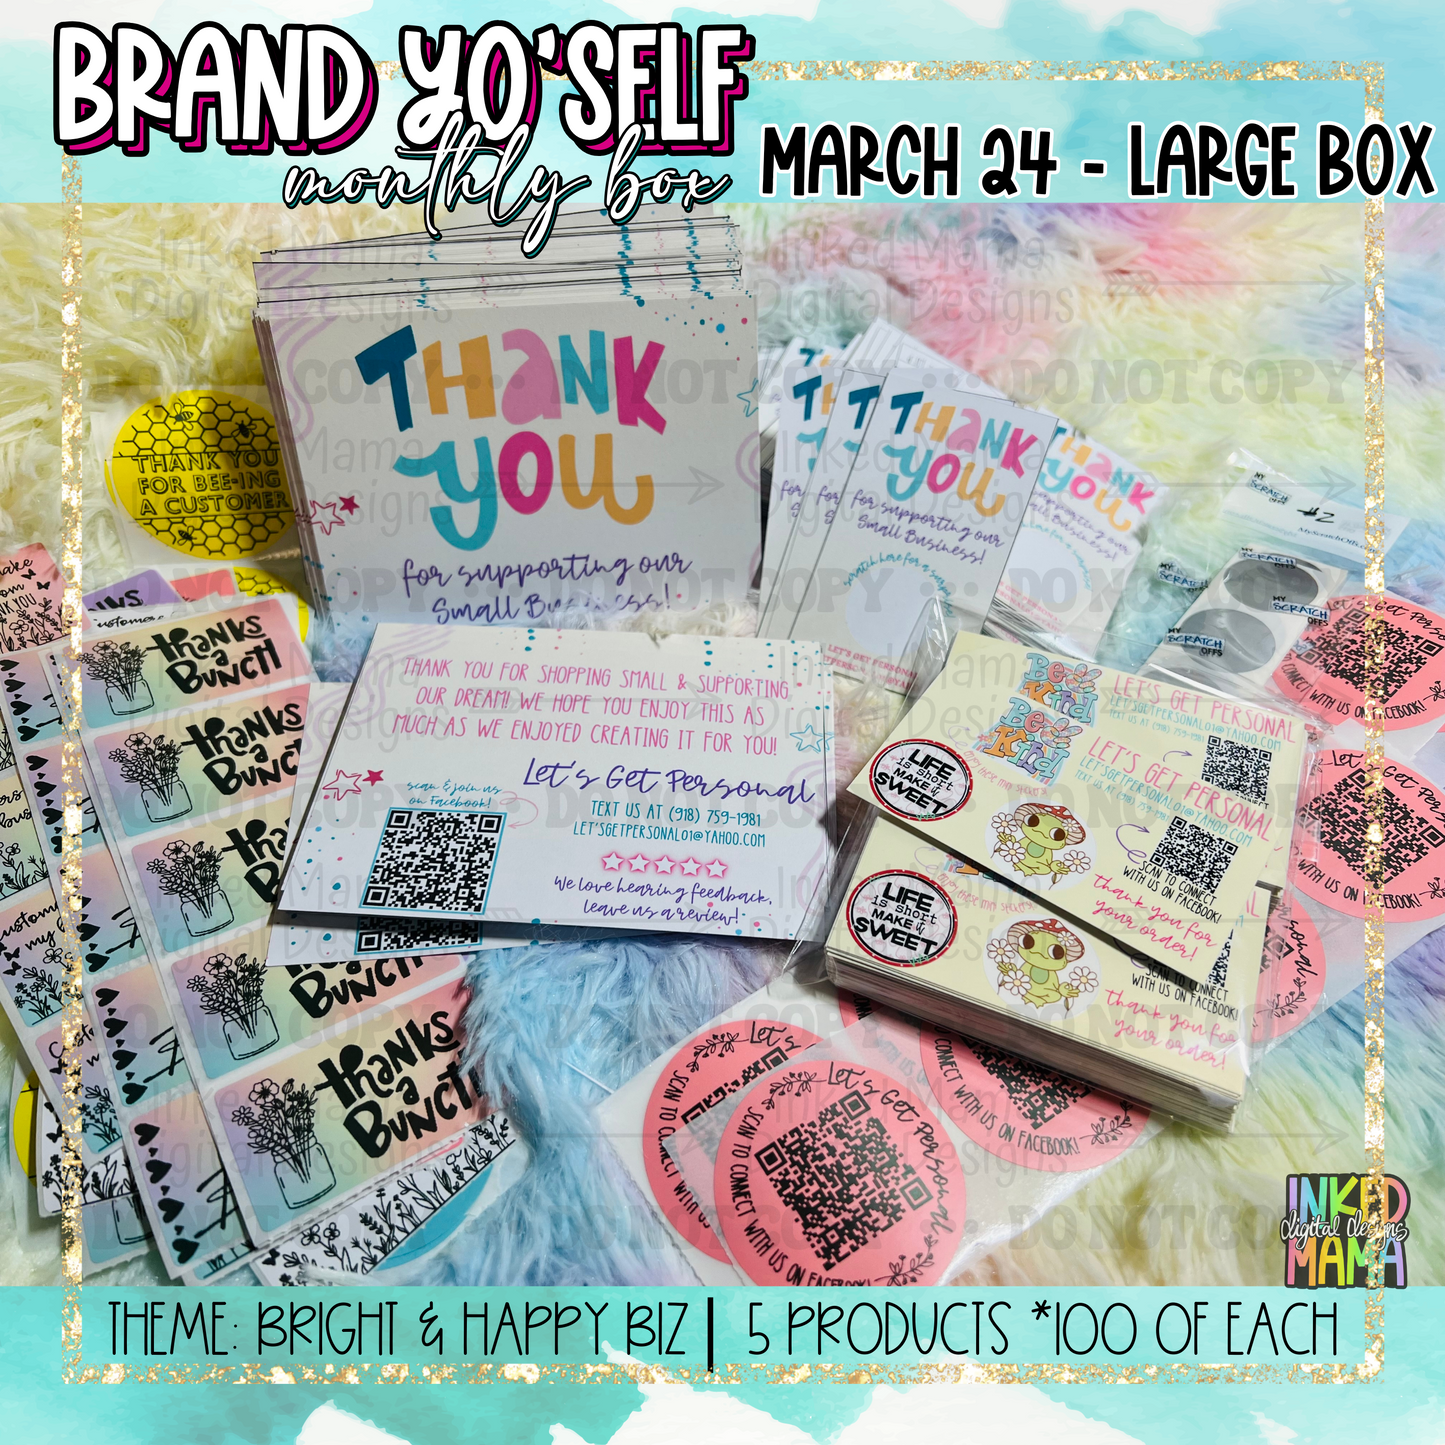 Brand Yo’self Monthly Box | Closes May 15th + Ships by May 25th | Small Business Packaging Products